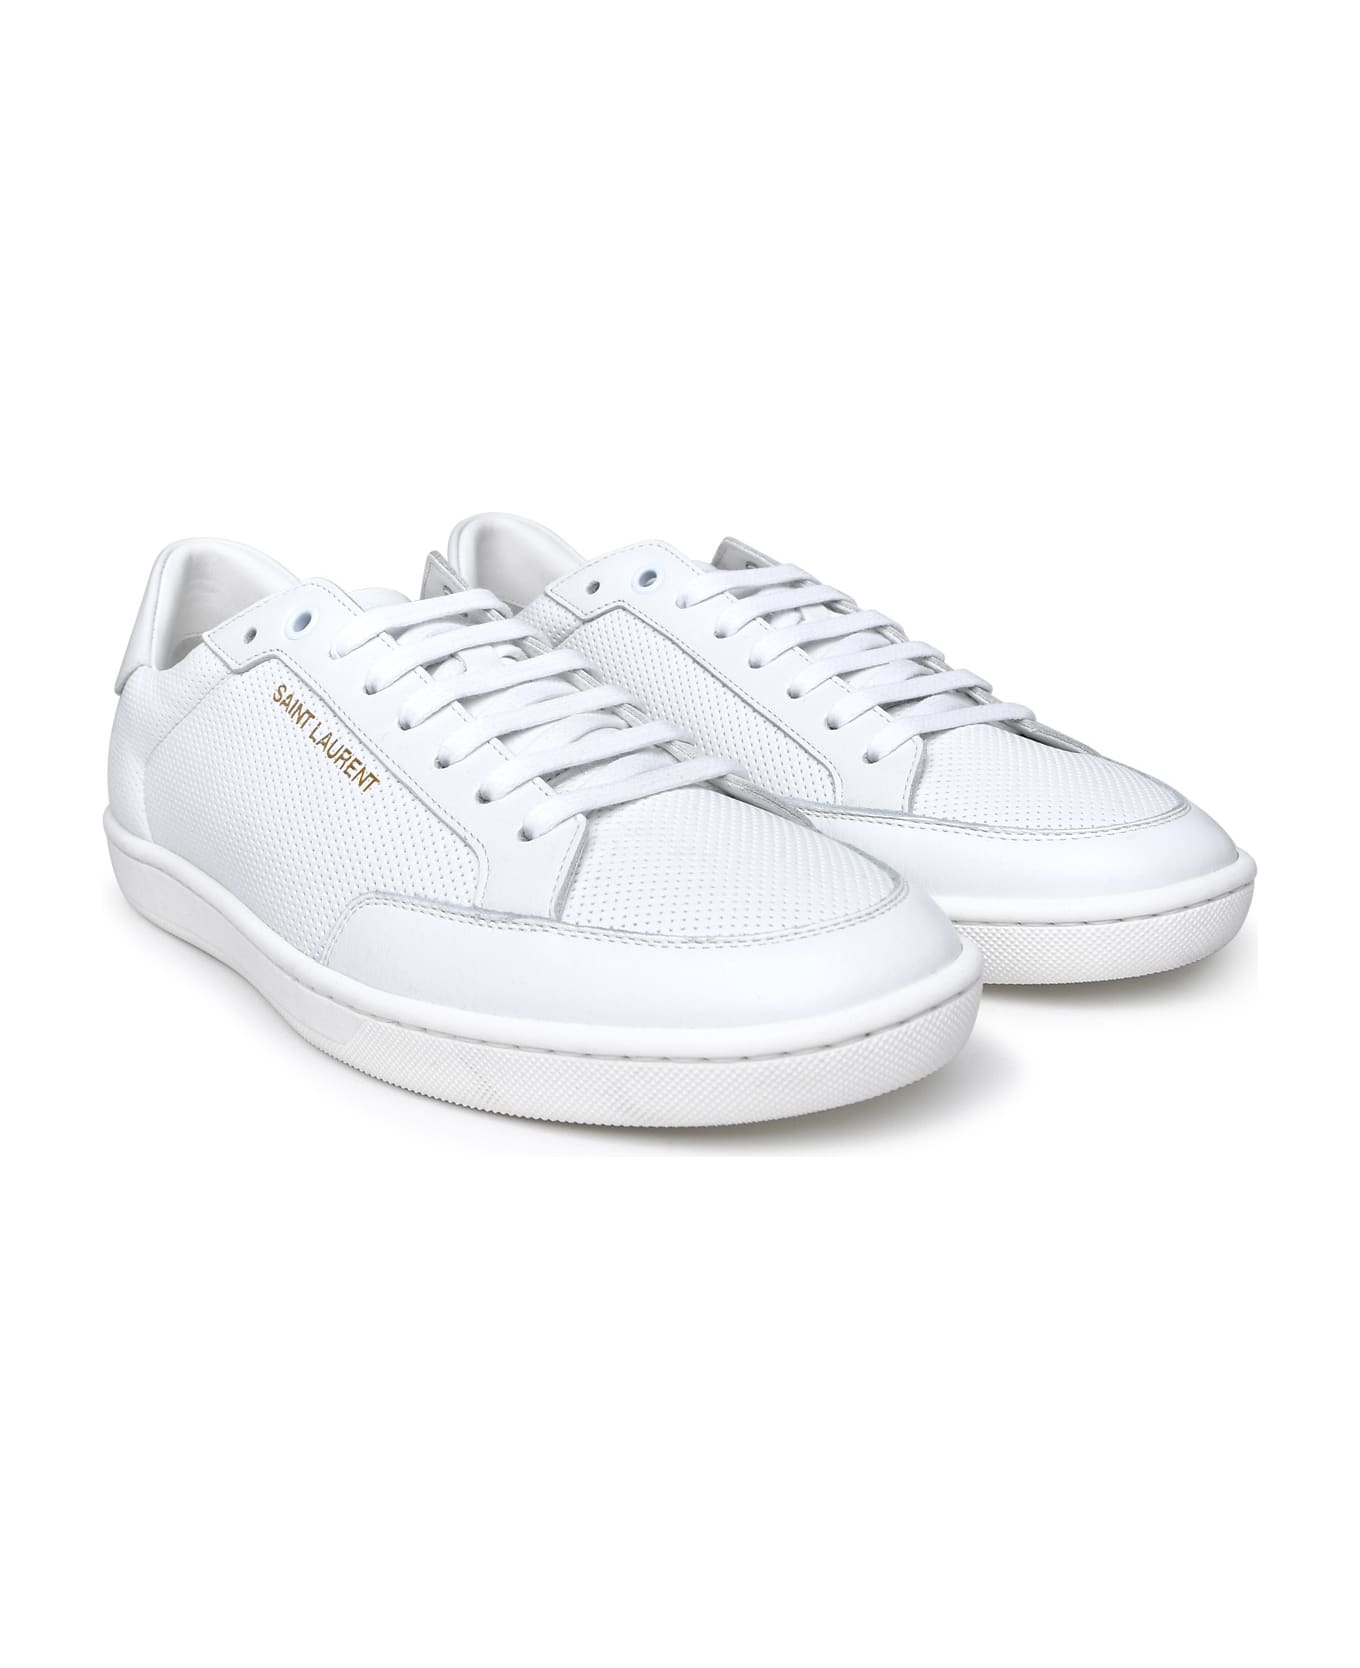 Saint Laurent Court Sneakers In White Leather - Bianco